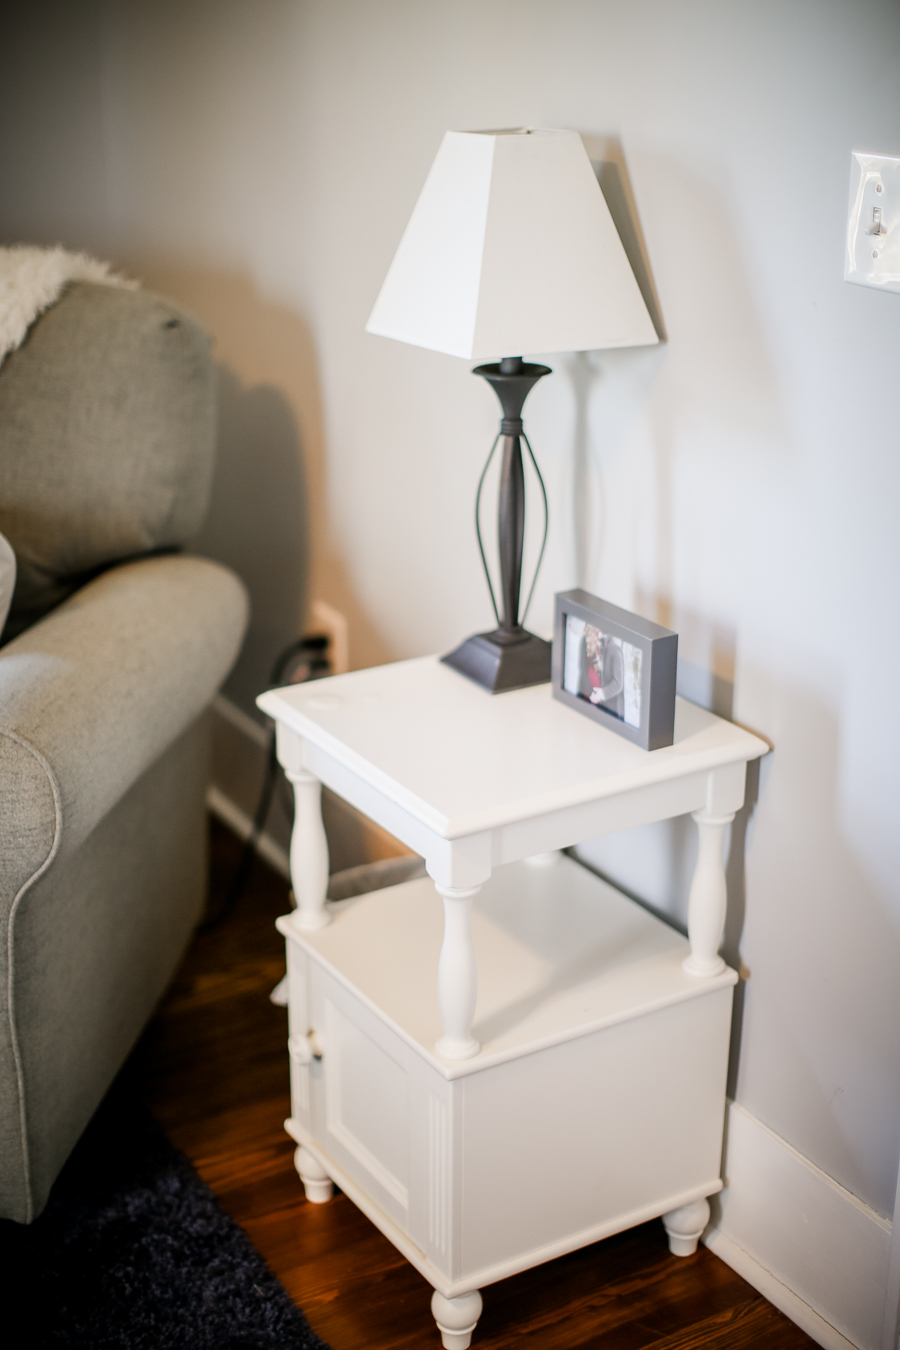 Side table in the nursery by Knoxville Wedding Photographer, Amanda May Photos.